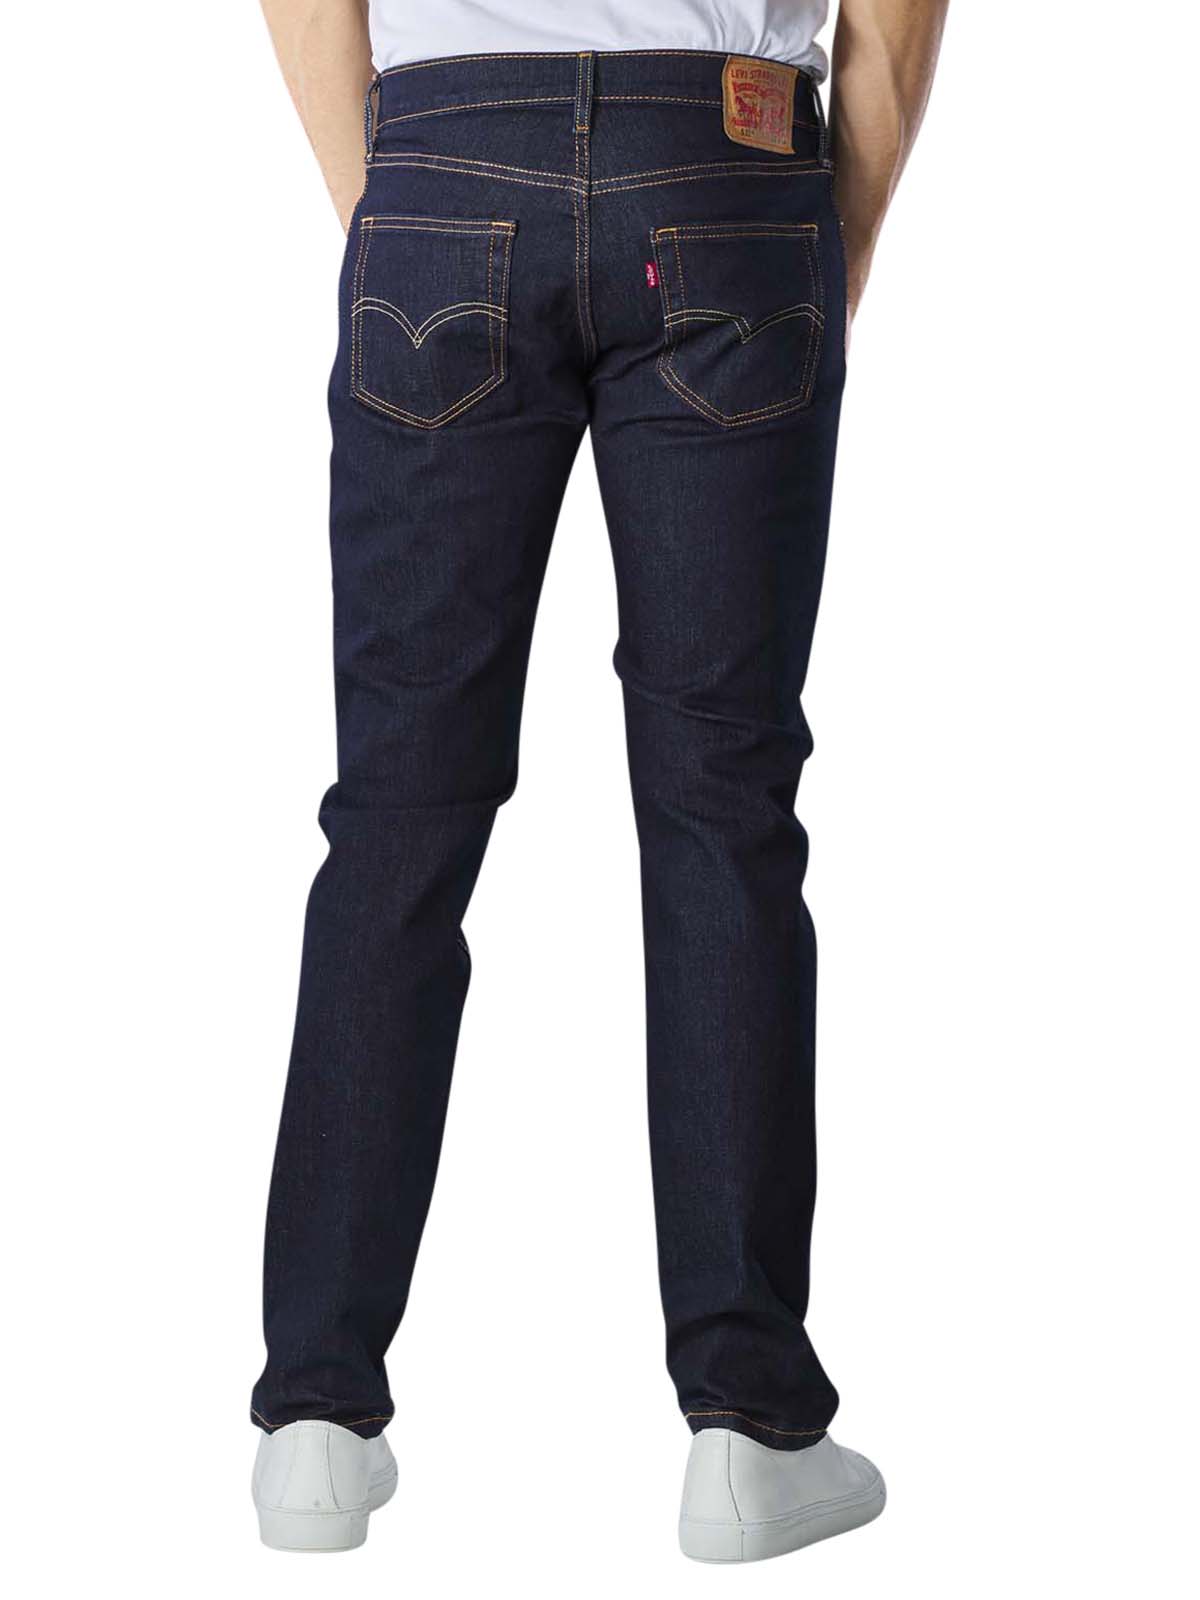 Levi's 511 Jeans Slim Fit dark hollow Levi's Men's Jeans | Free Shipping on   - SIMPLY LOOK GOOD